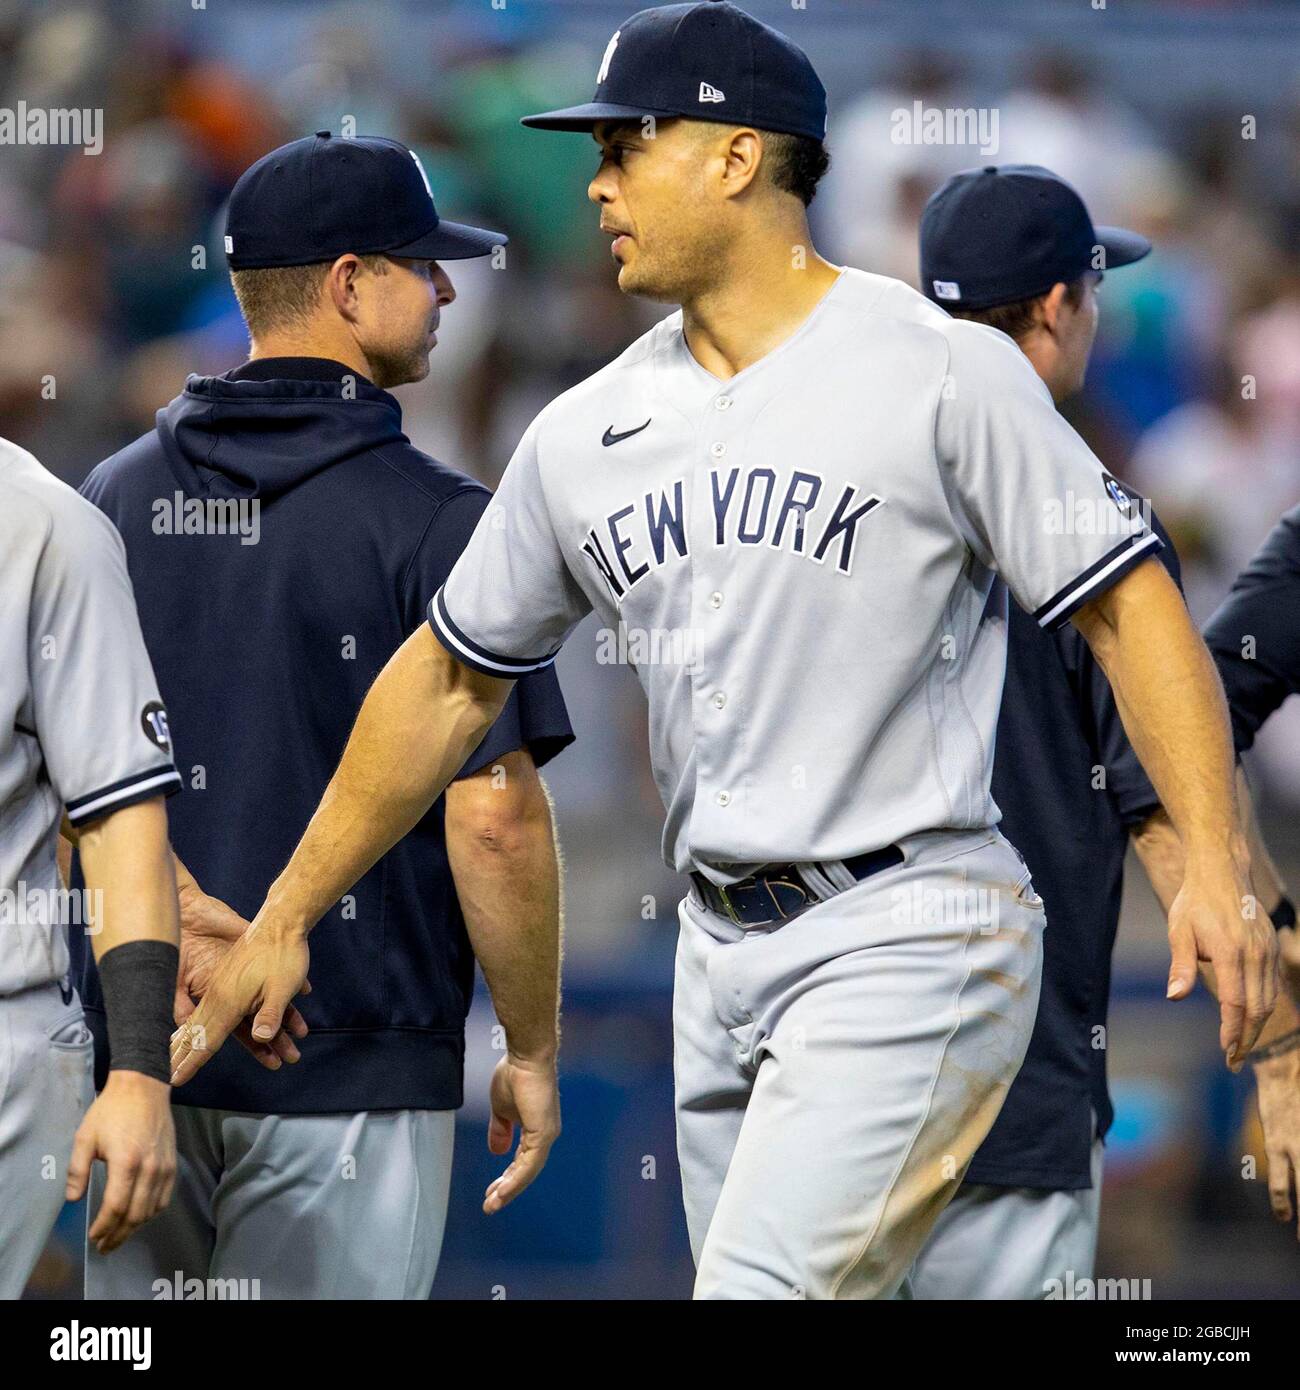 New York Yankees player Giancarlo Stanton (27) reacts with his teammtes  after the ninth inning against the Miami Marlins at loanDepot park in the  Little Havana neighborhood of Miami, Florida, on Sunday